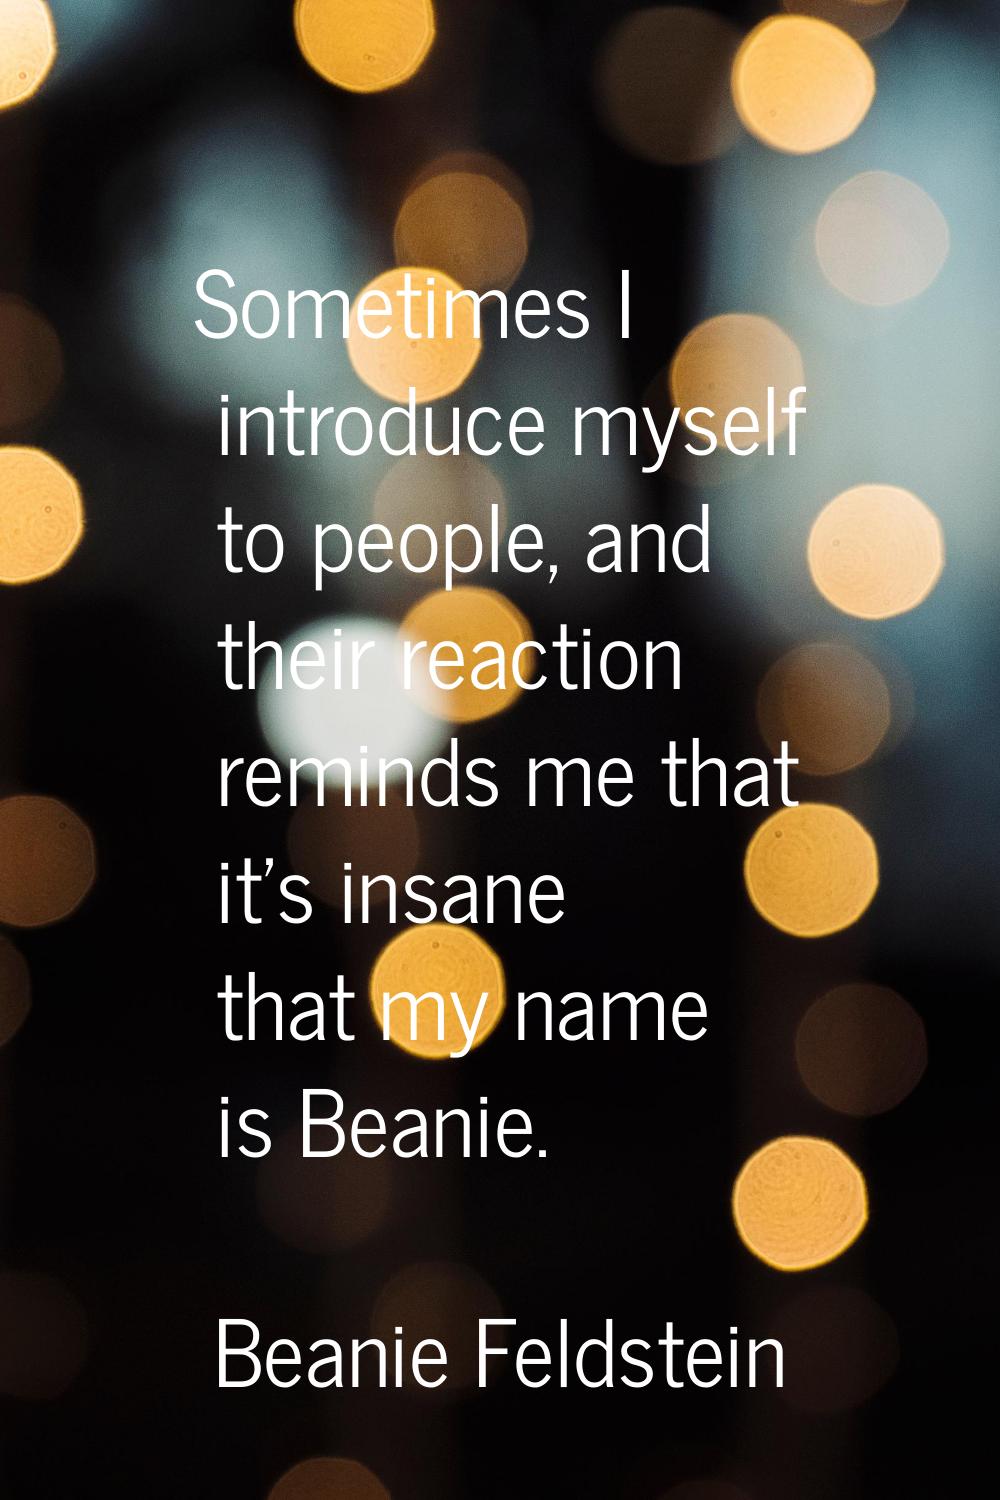 Sometimes I introduce myself to people, and their reaction reminds me that it's insane that my name